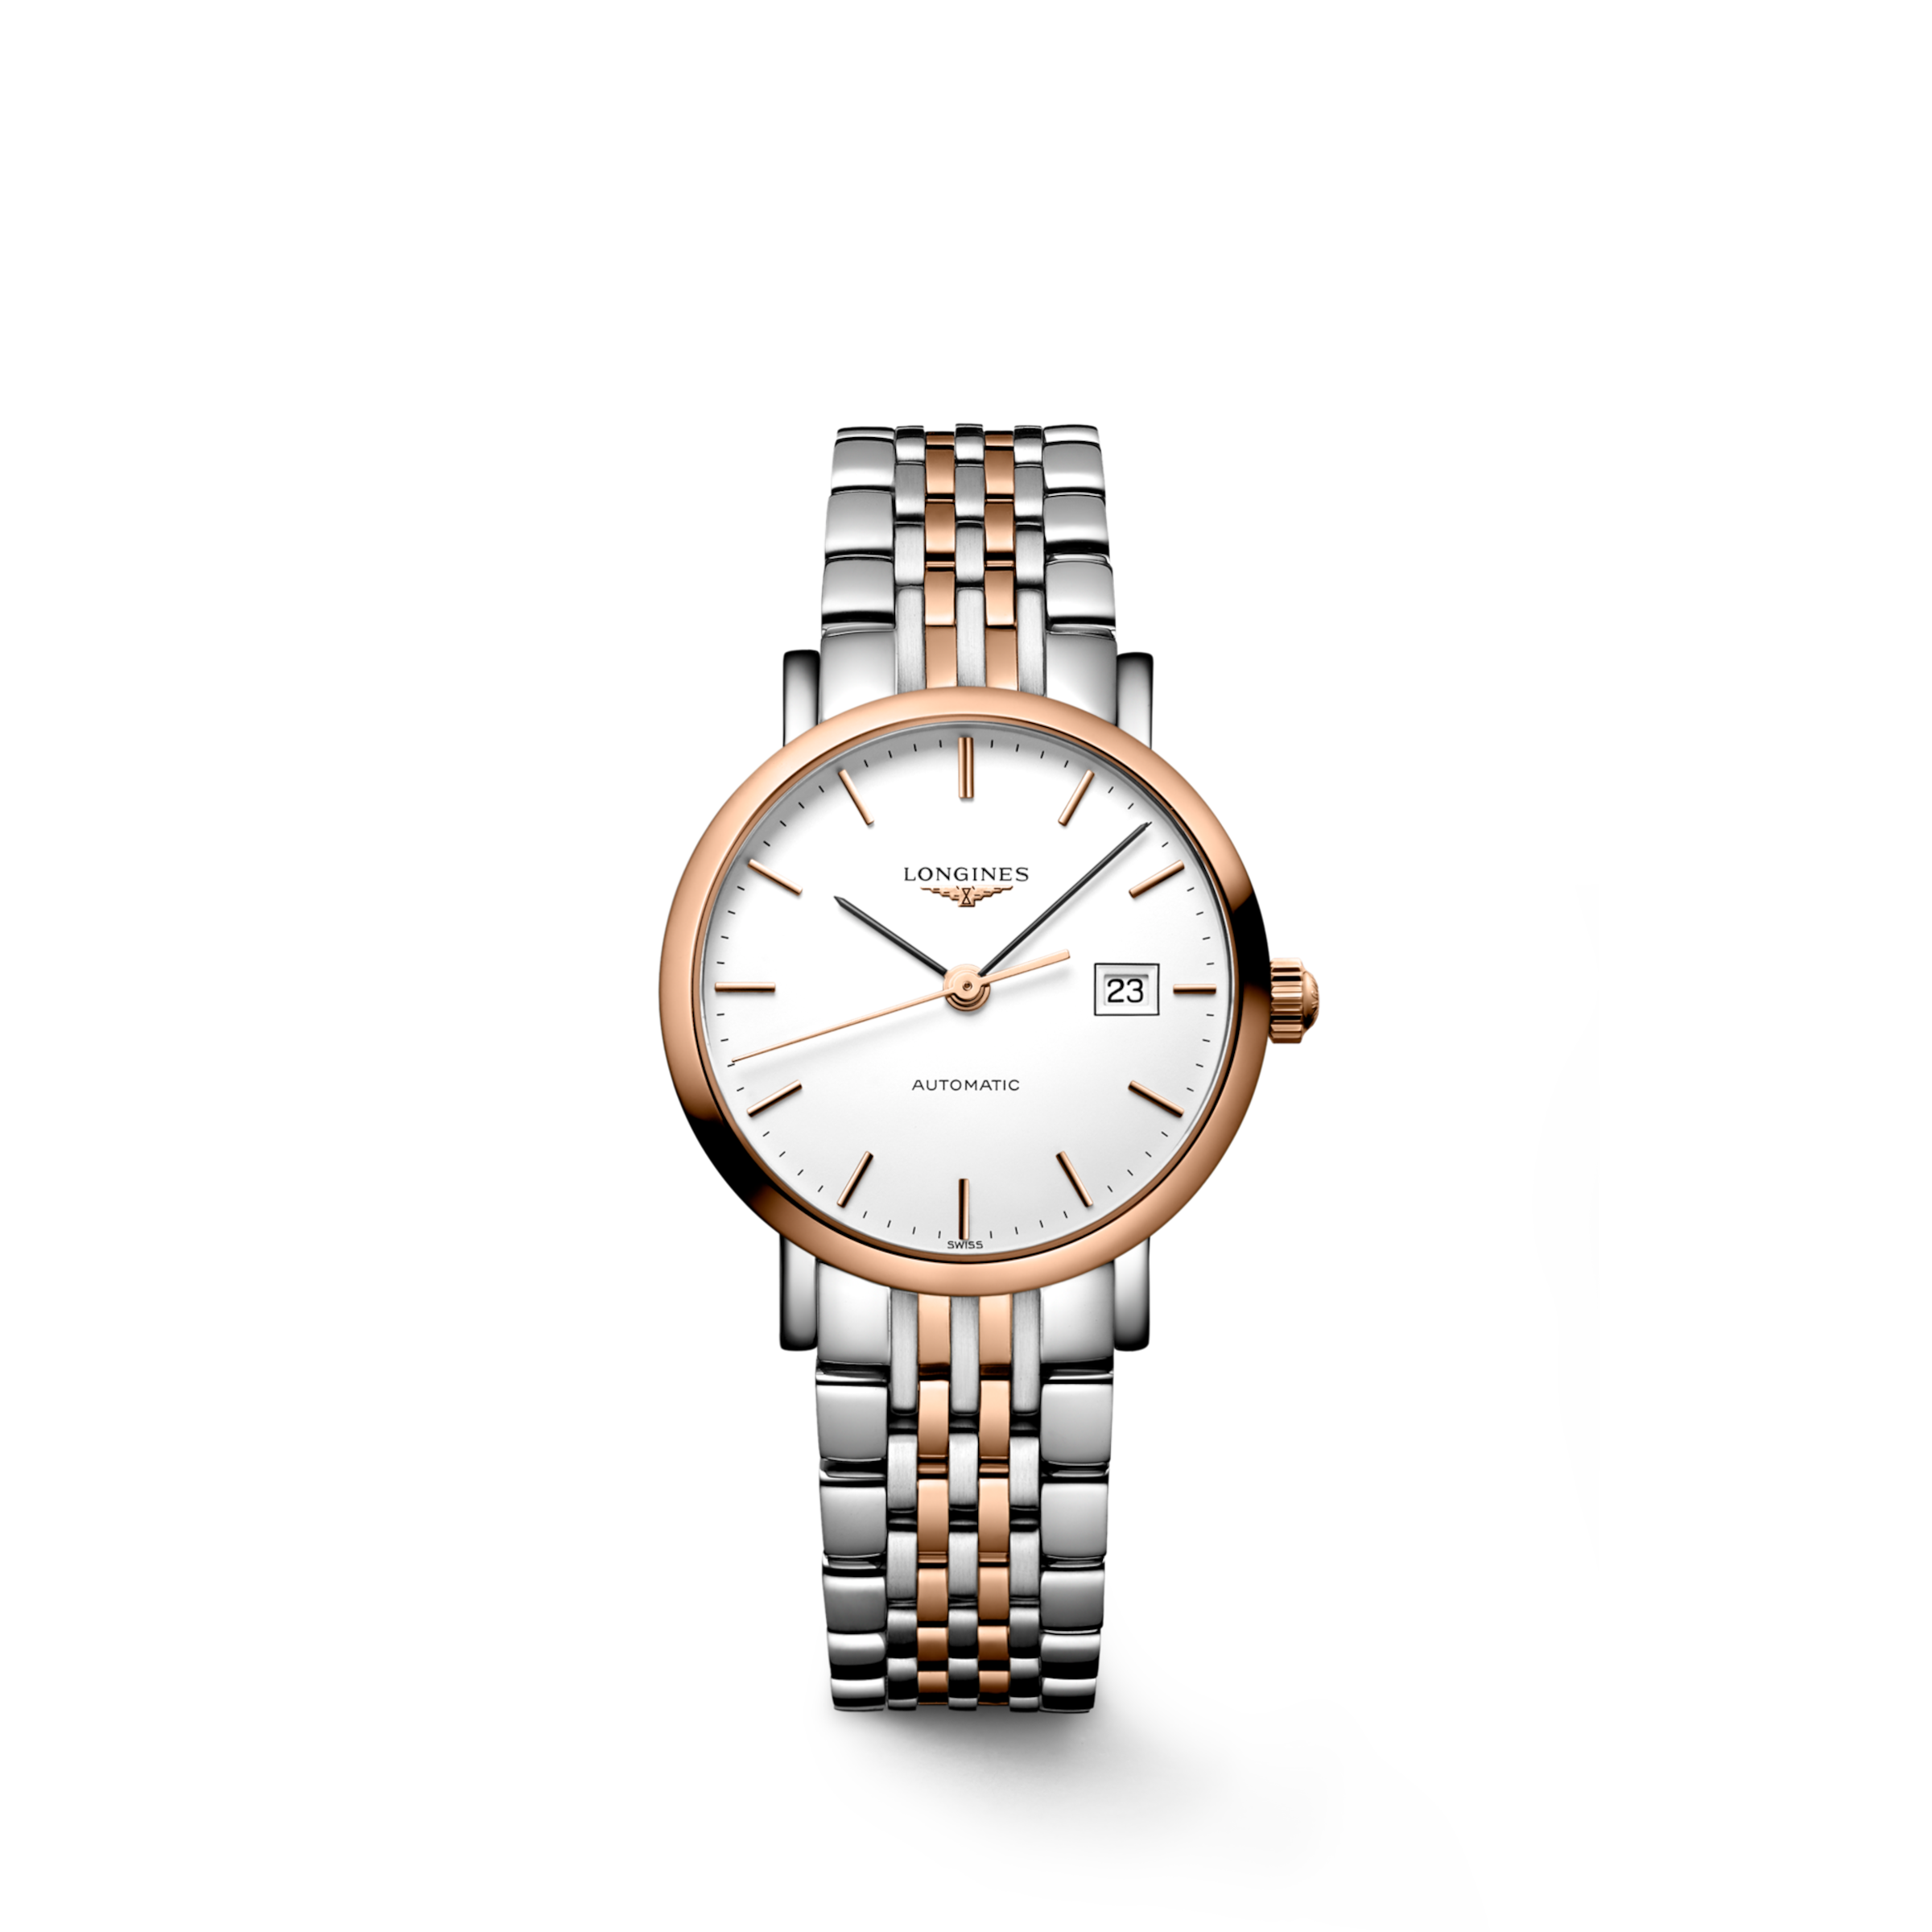 Longines ELEGANT COLLECTION Automatic Stainless steel and 18 karat pink gold cap 200 Watch - L4.310.5.12.7